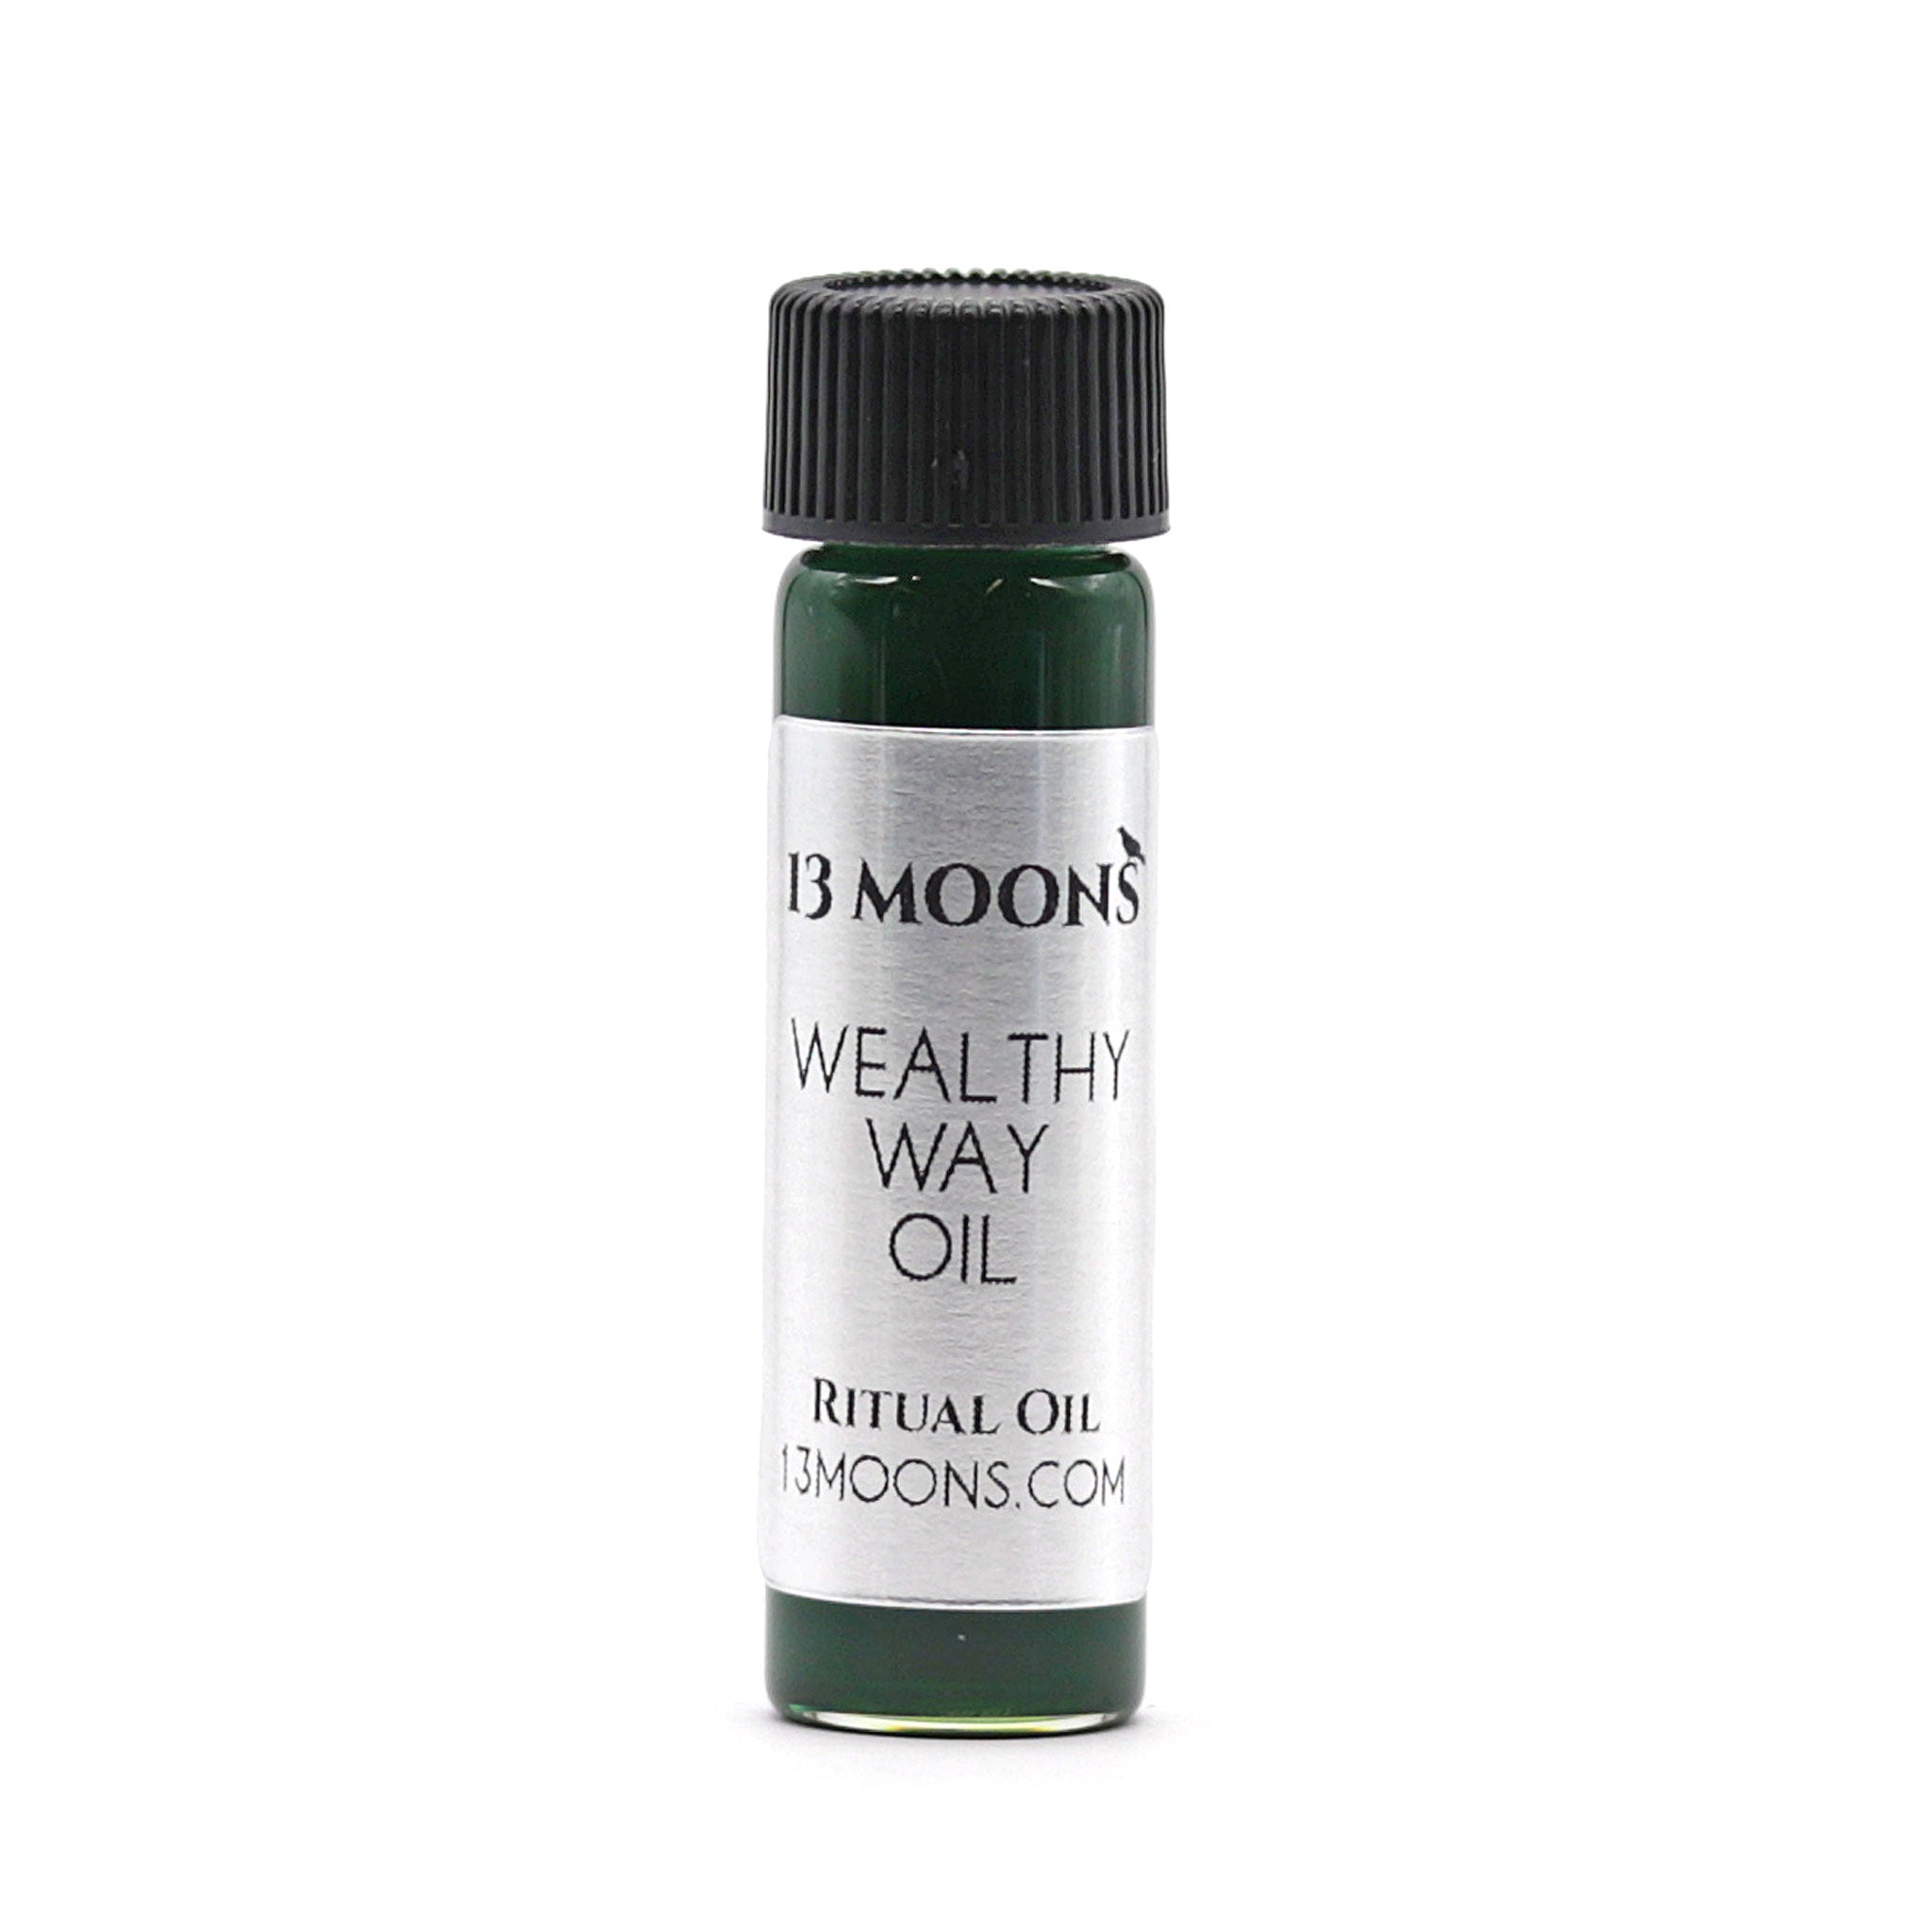 Wealthy Way Oil by 13 Moons - 13 Moons